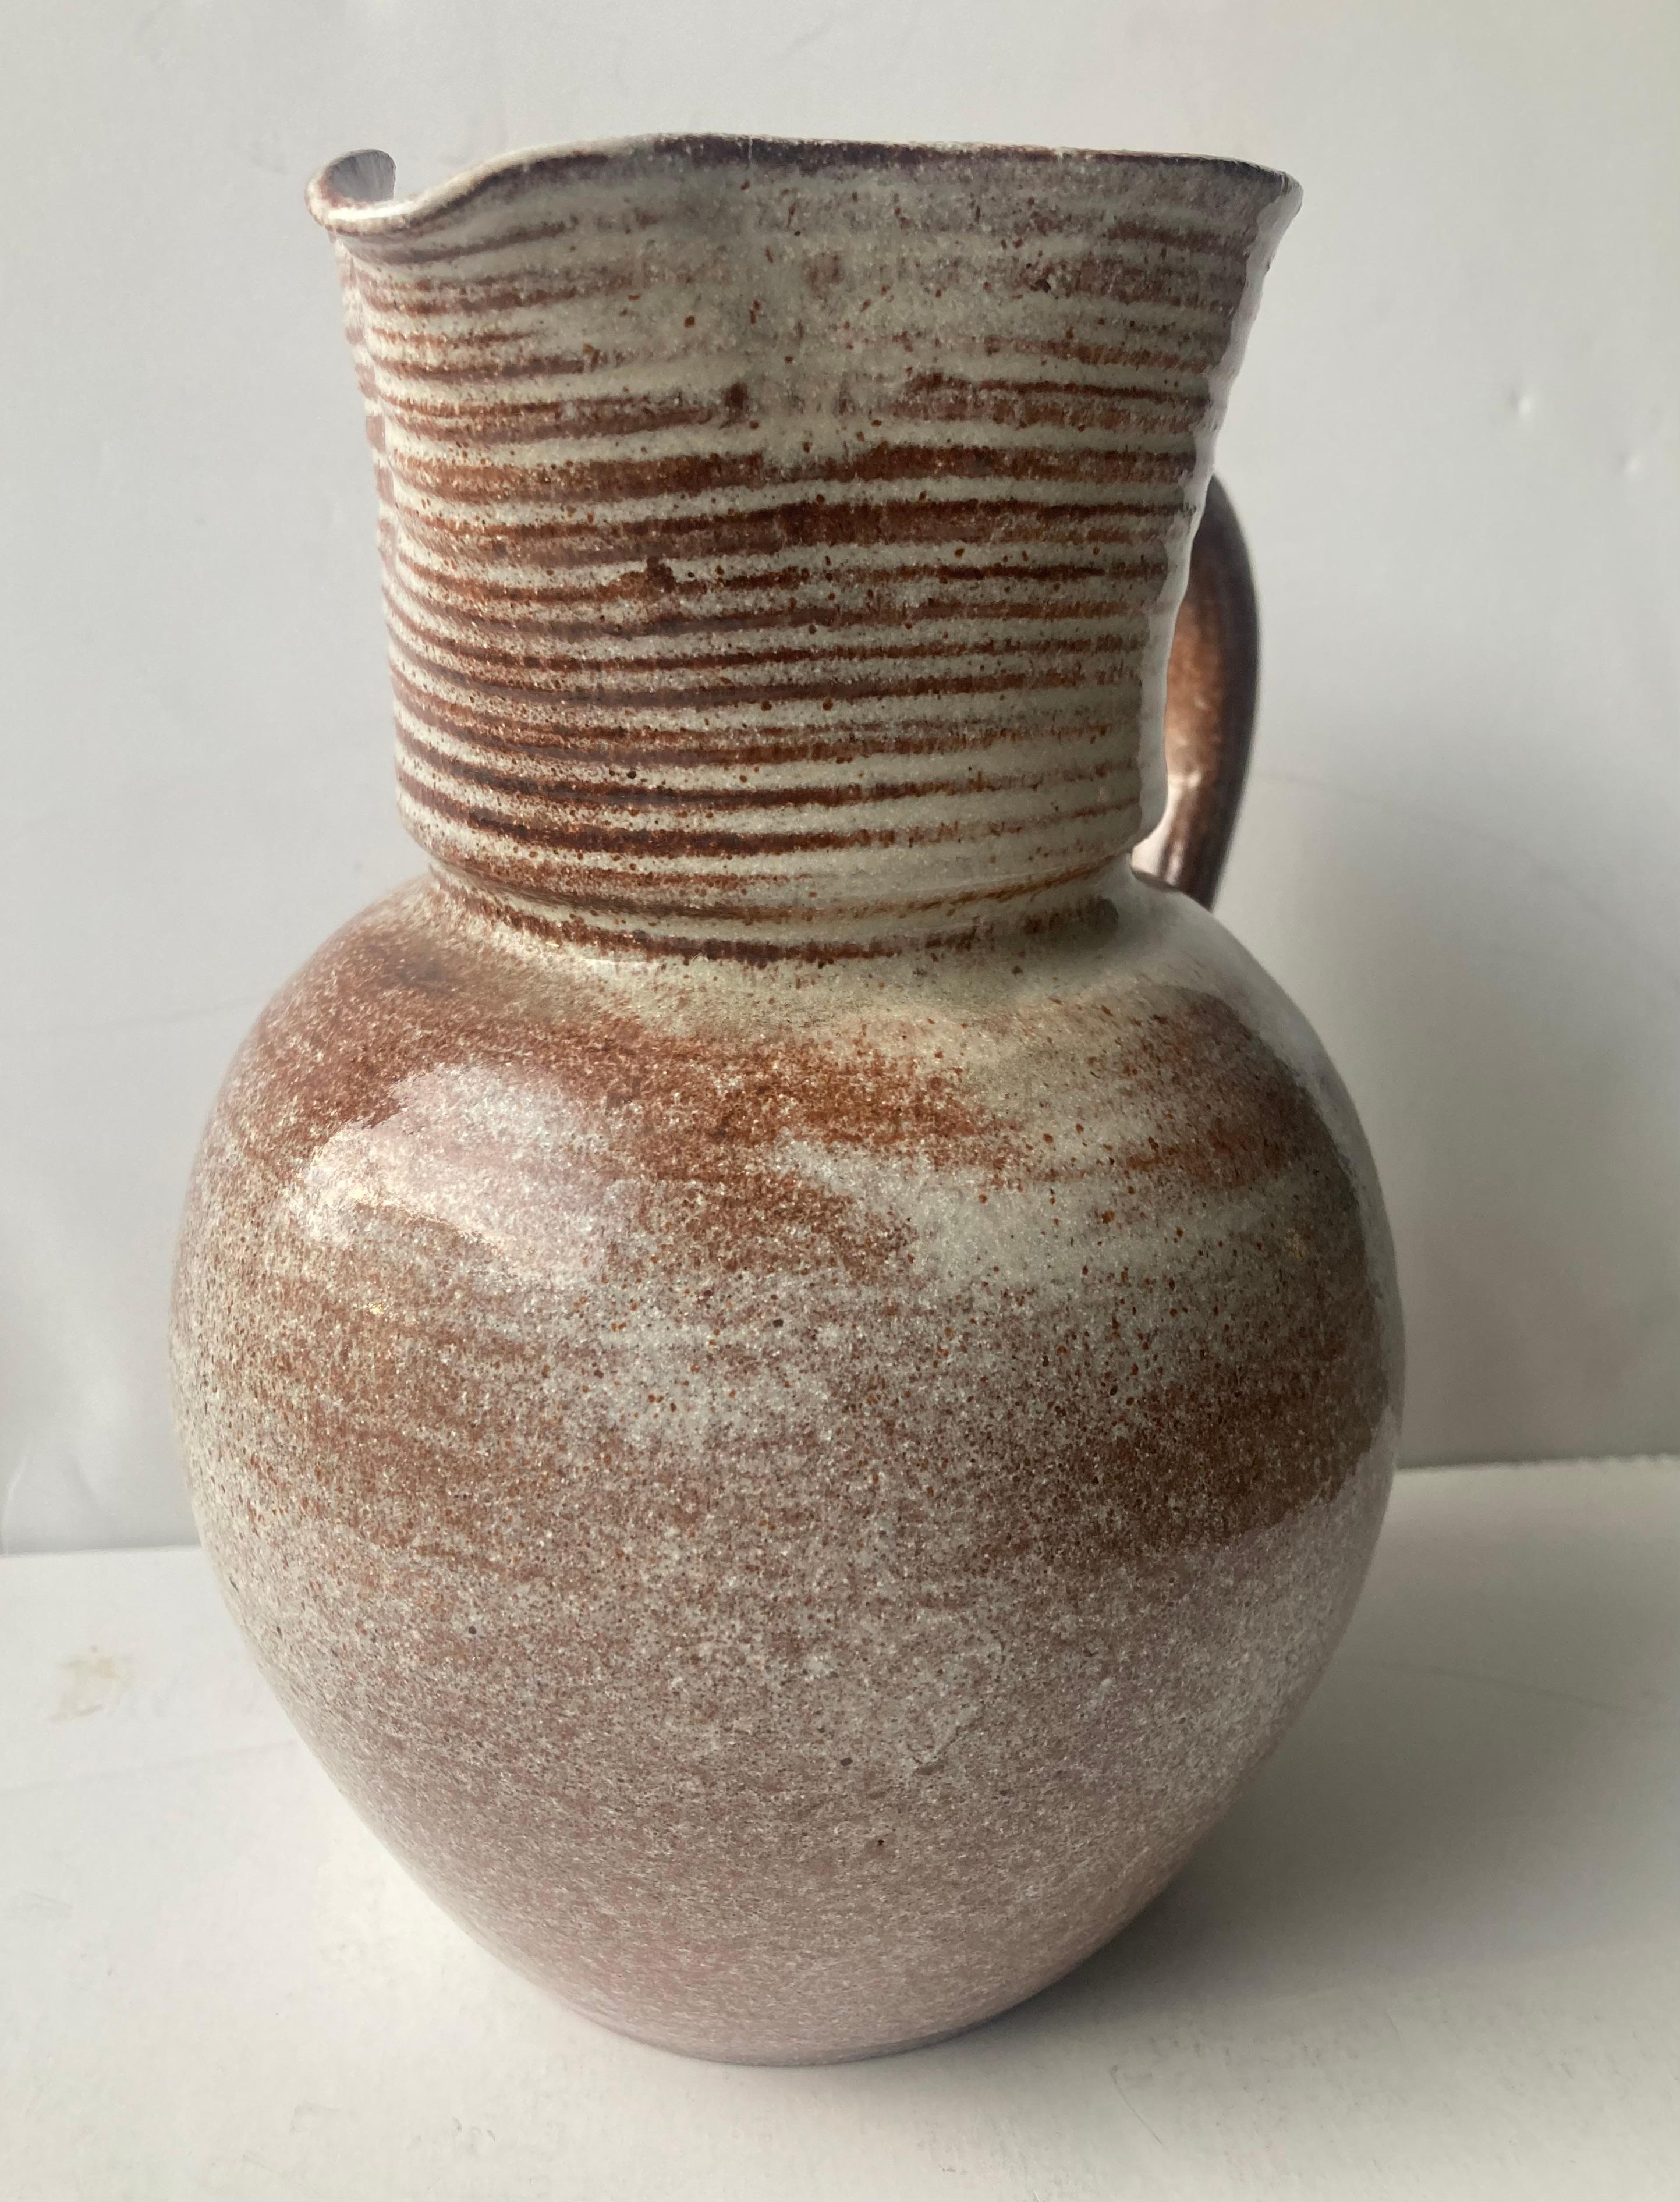 Very nice and elegant ceramic pitcher by the well known potter Laura Andreson .